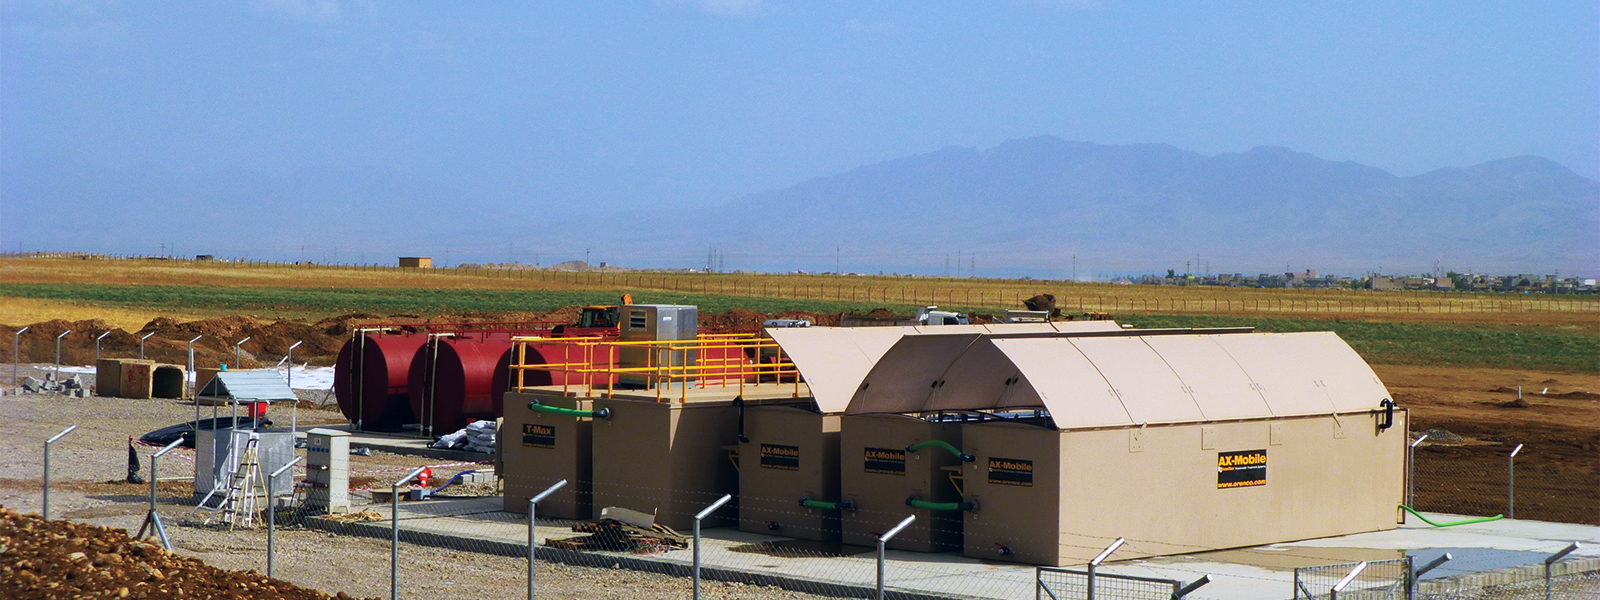 Photo of AX-Mobile Wastewater treatment system at oil & gas camp